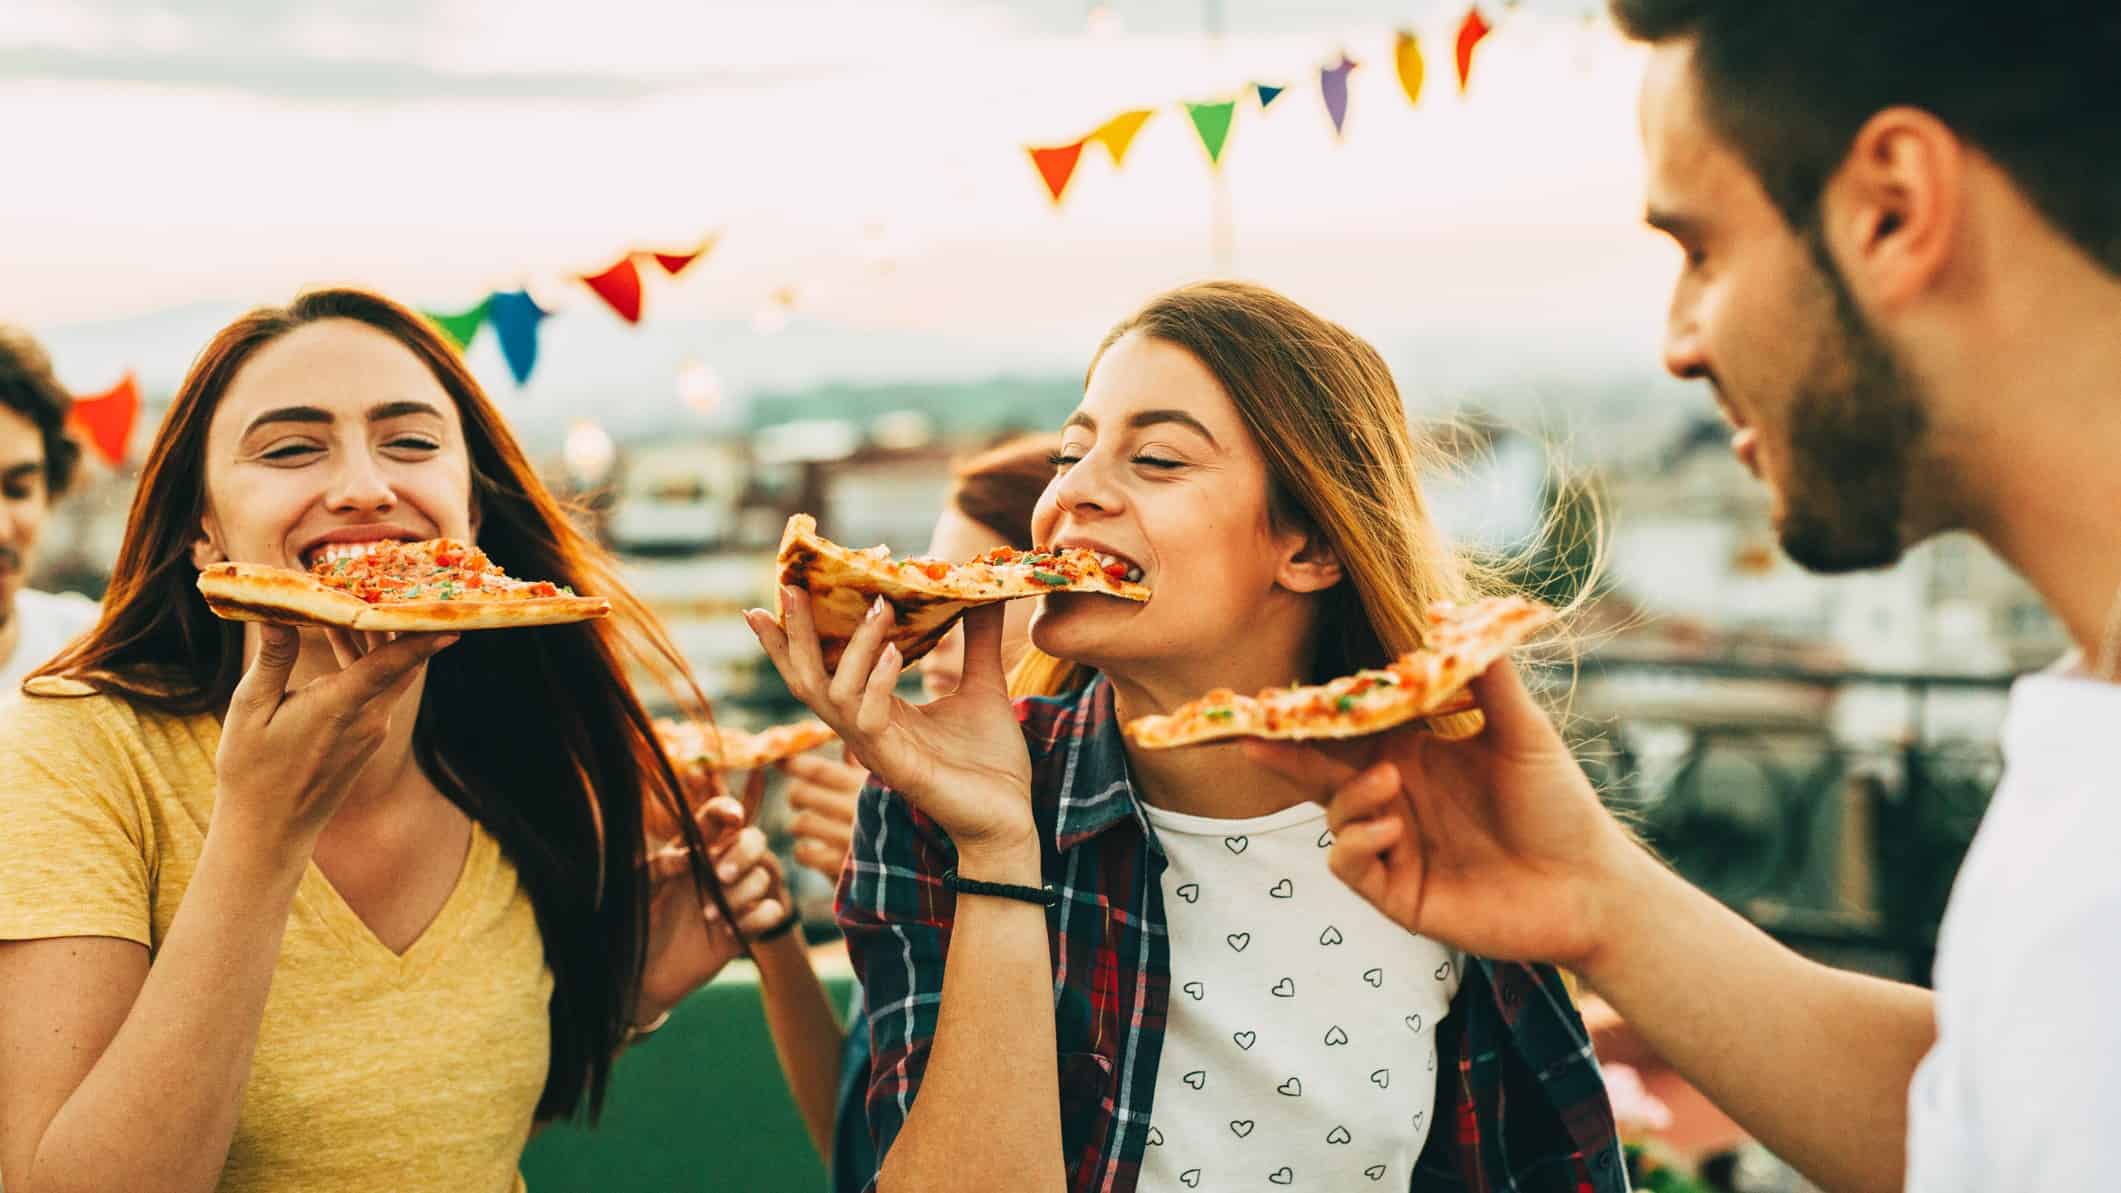 A couple of friends at a rooftop party enjoying some hot and tasty Domino's pizza